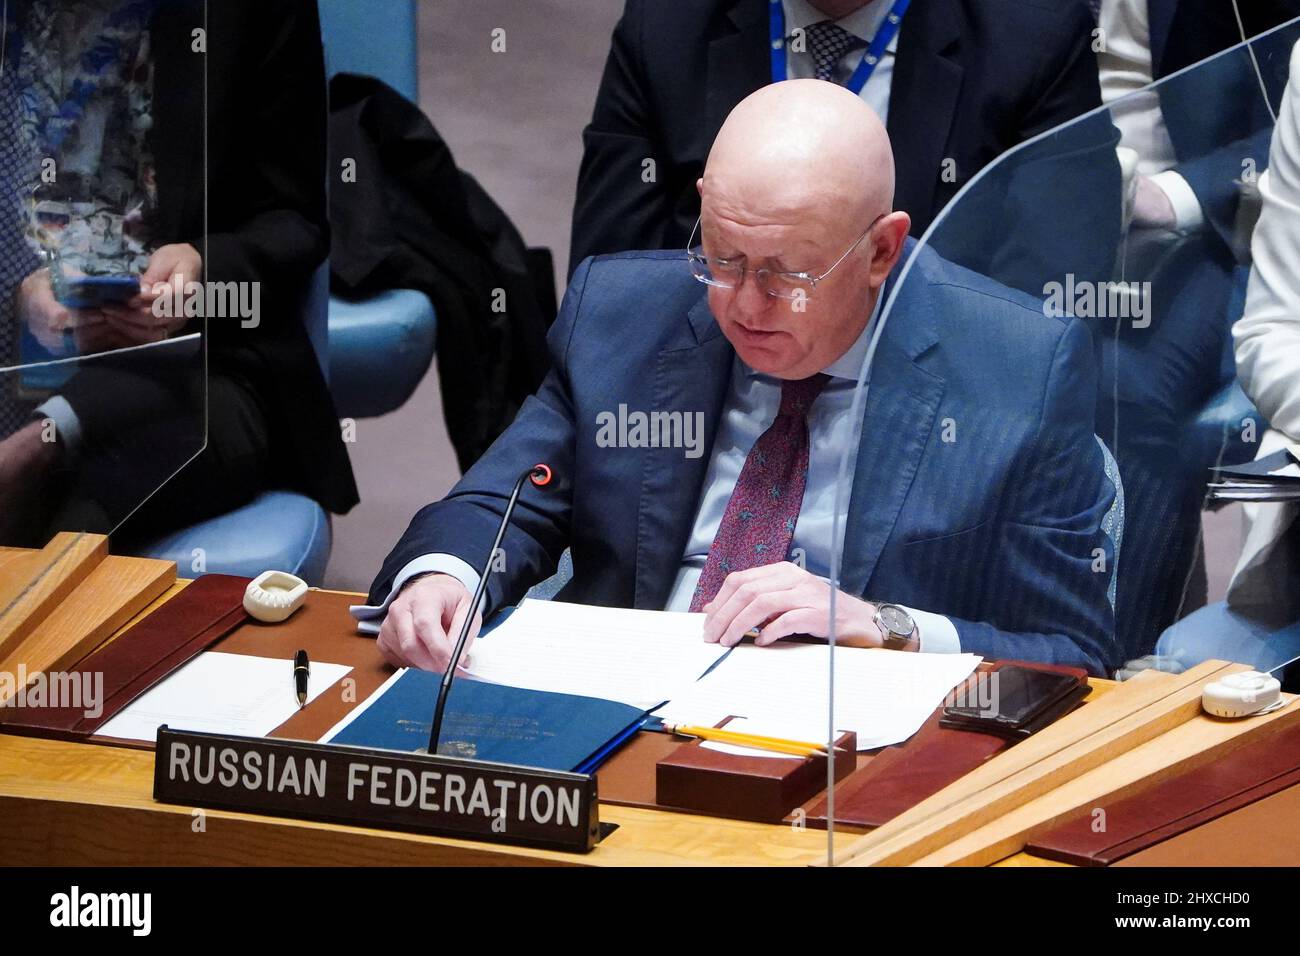 Russia's Ambassador to the U.N. Vasily Nebenzya attends the United Nations Security Council meeting on Threats to International Peace and Security, following Russia's invasion of Ukraine, in New York City, U.S. March 11, 2022. REUTERS/Carlo Allegri Stock Photo